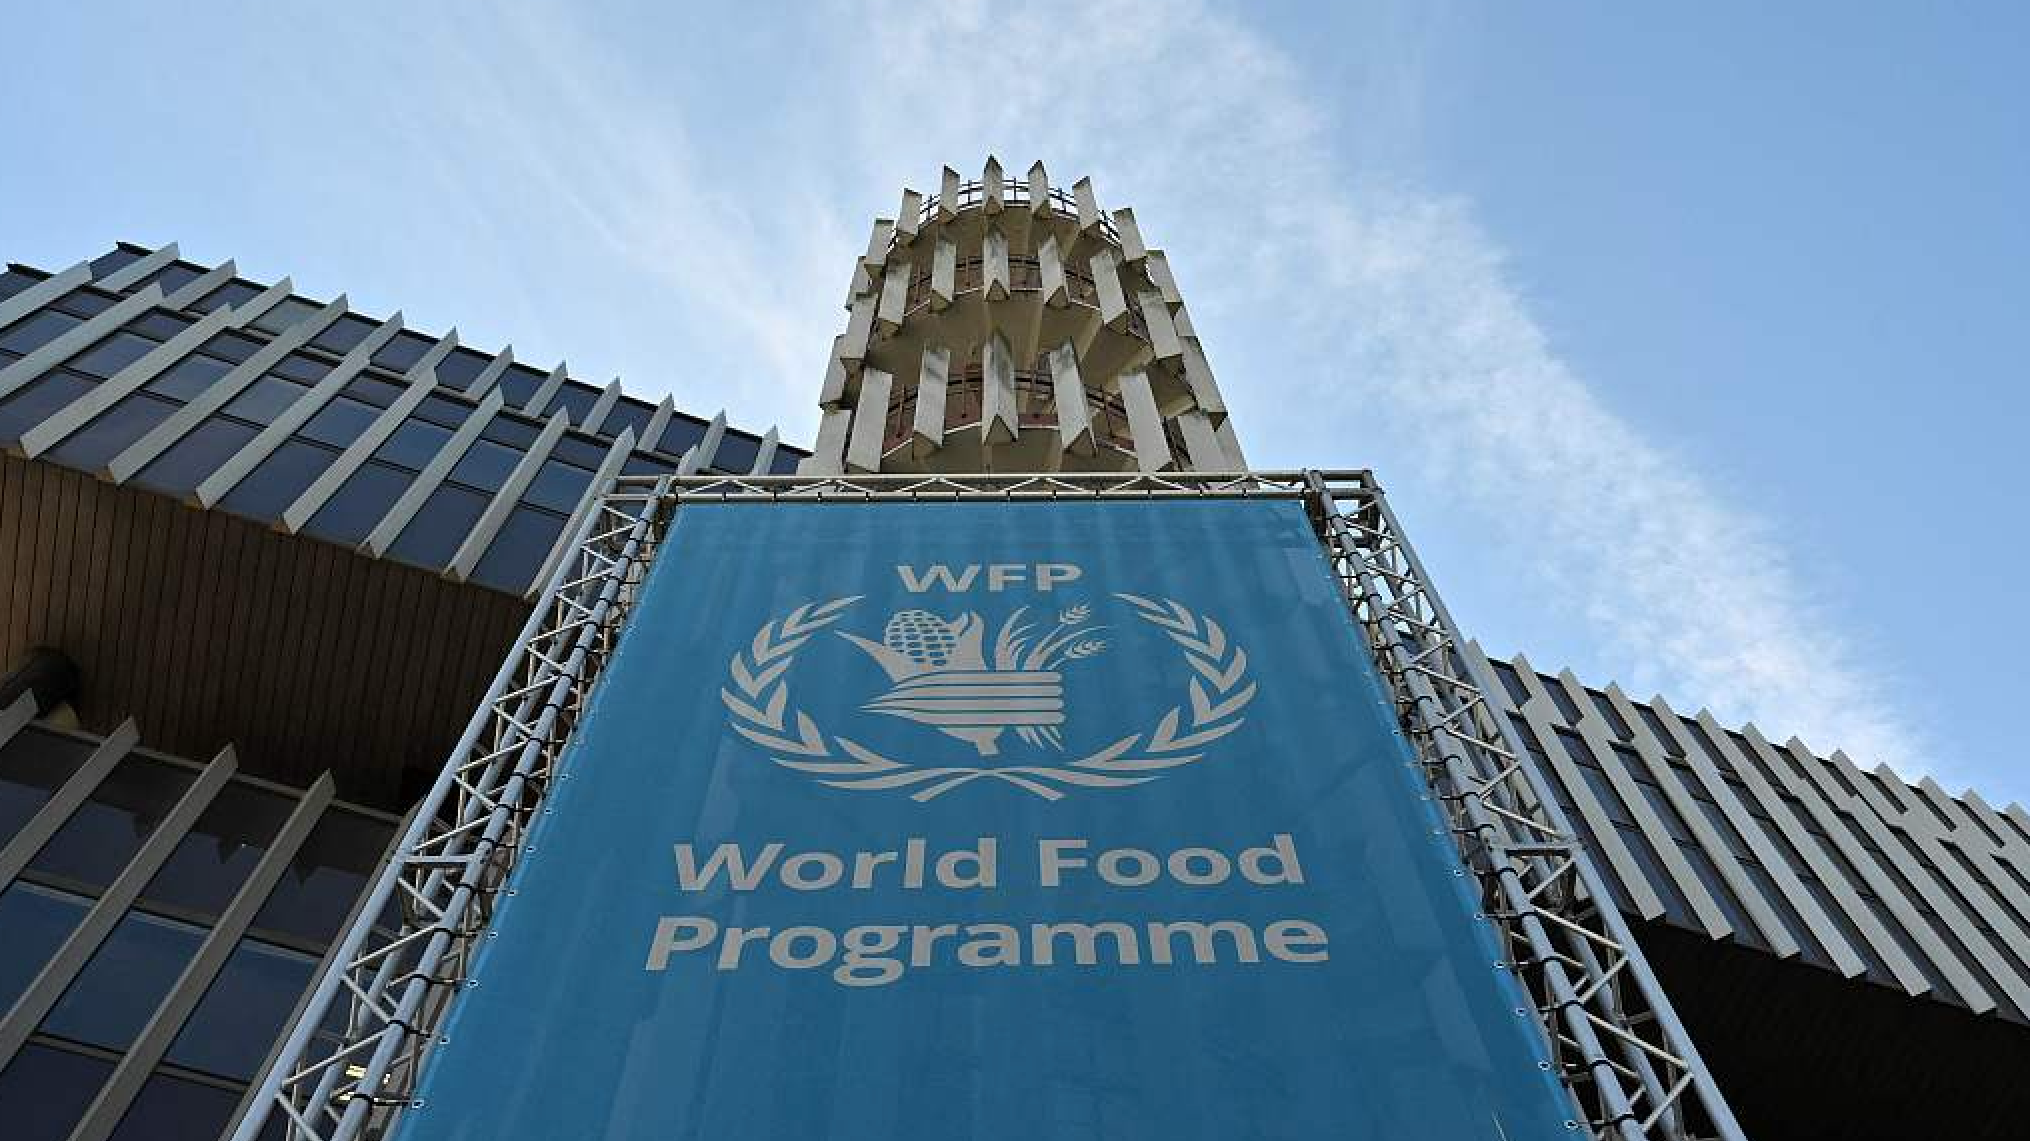 FILE: A general view shows the exterior of The World Food Programme (WFP) headquarters in Rome. /CFP